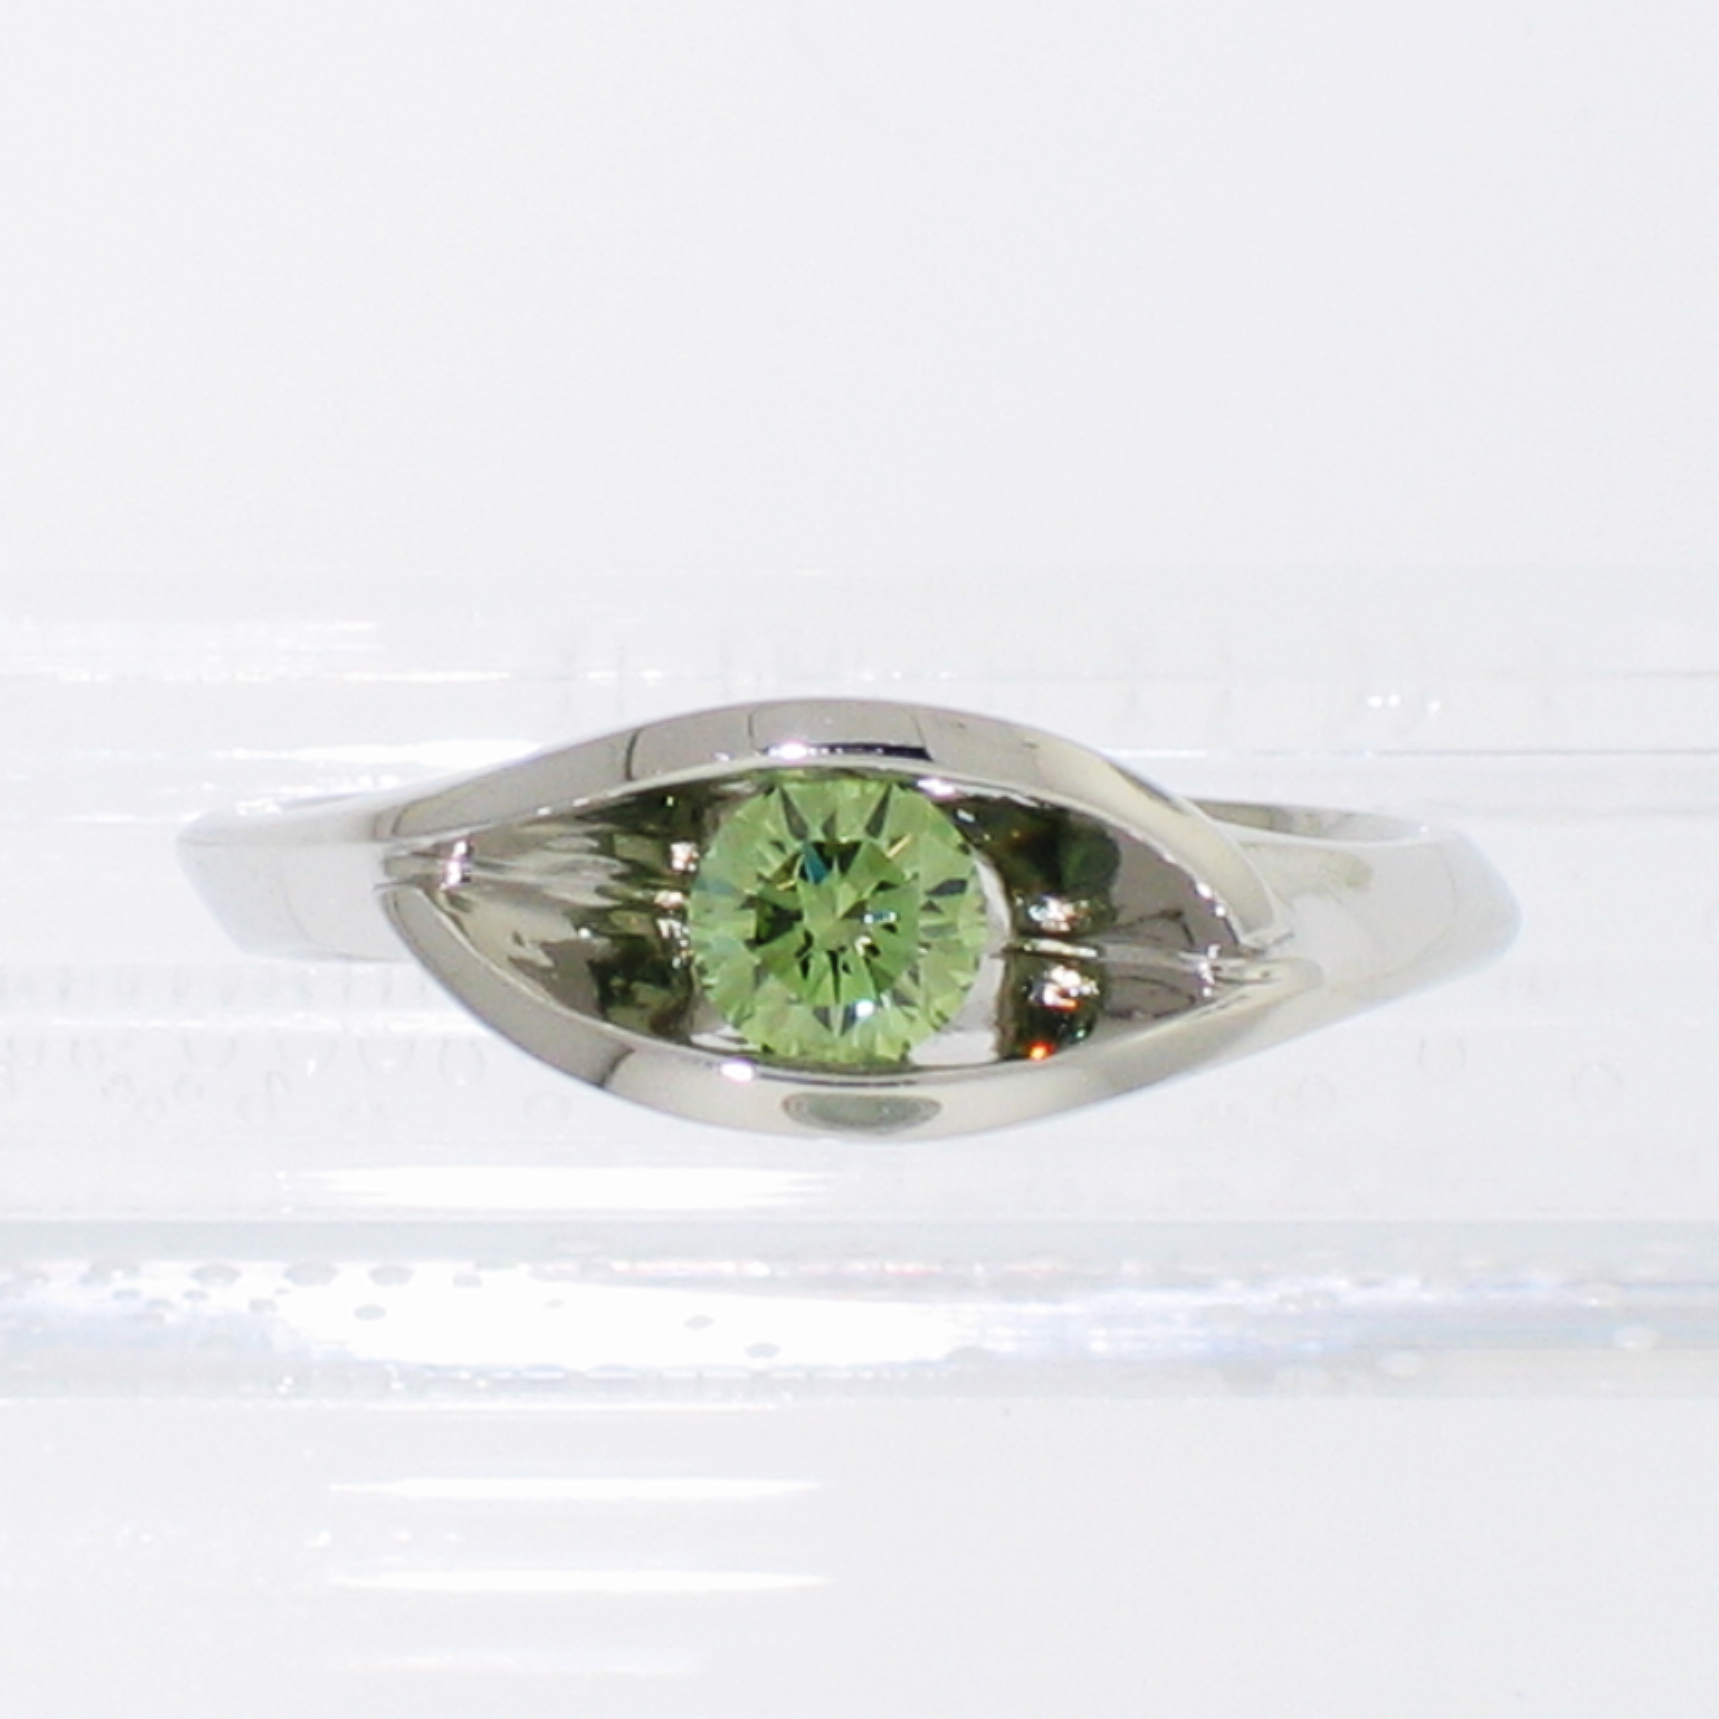 Platinum wrap-around v-shaped channel ring with channel-set iradiated green round brilliant diamond